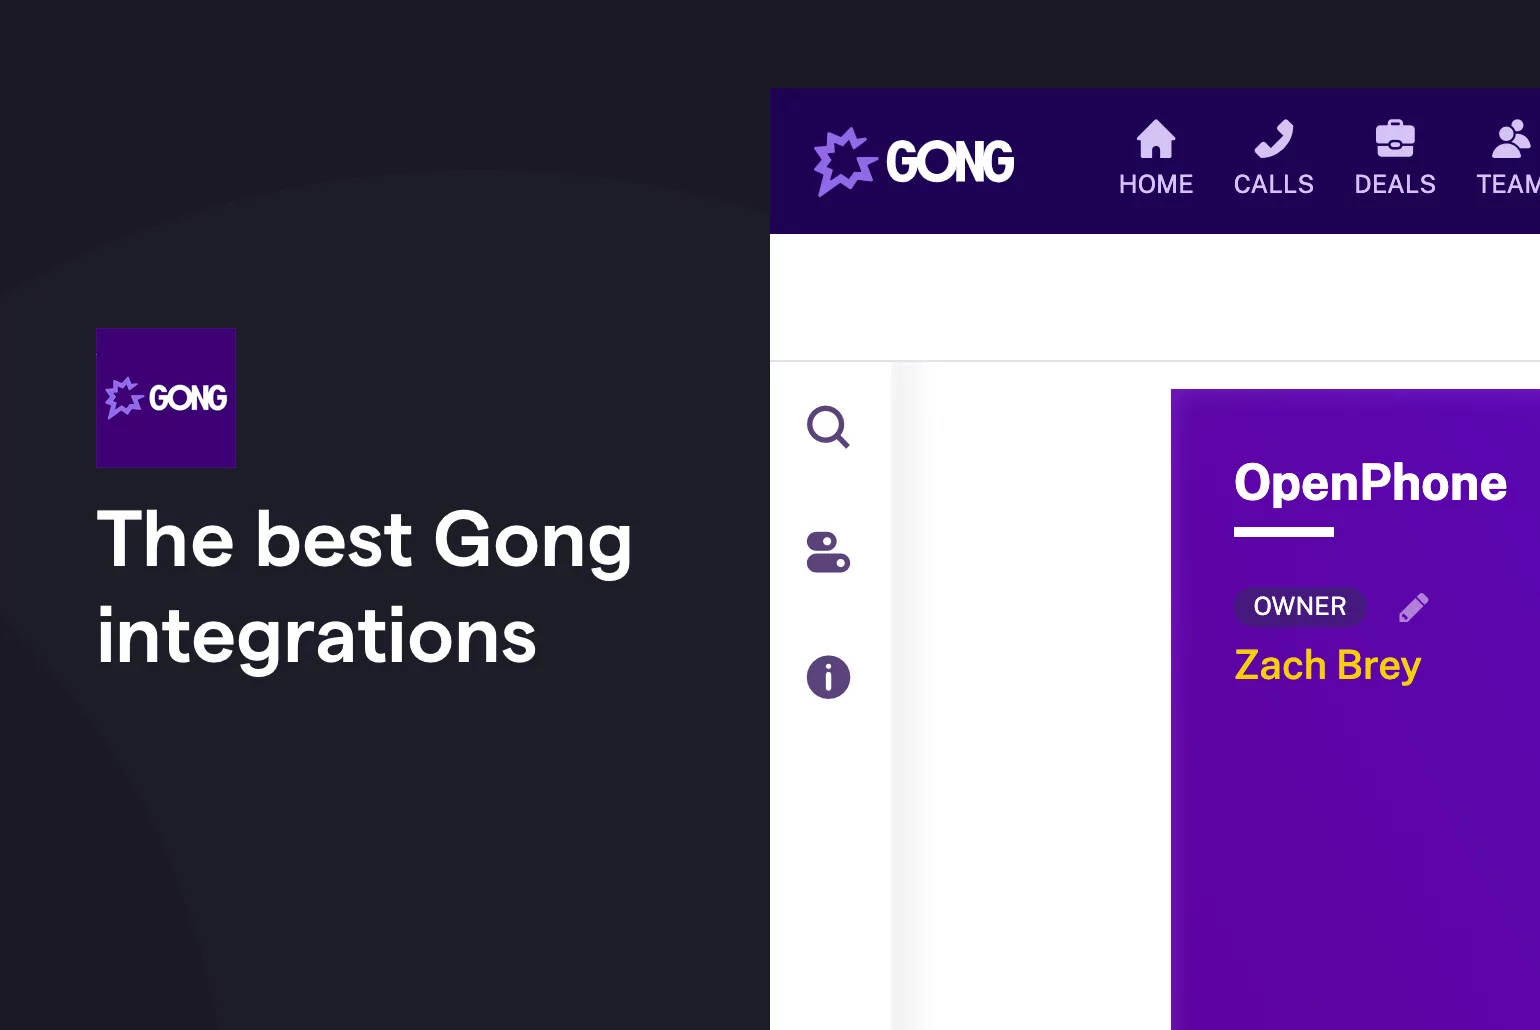 The best Gong integrations